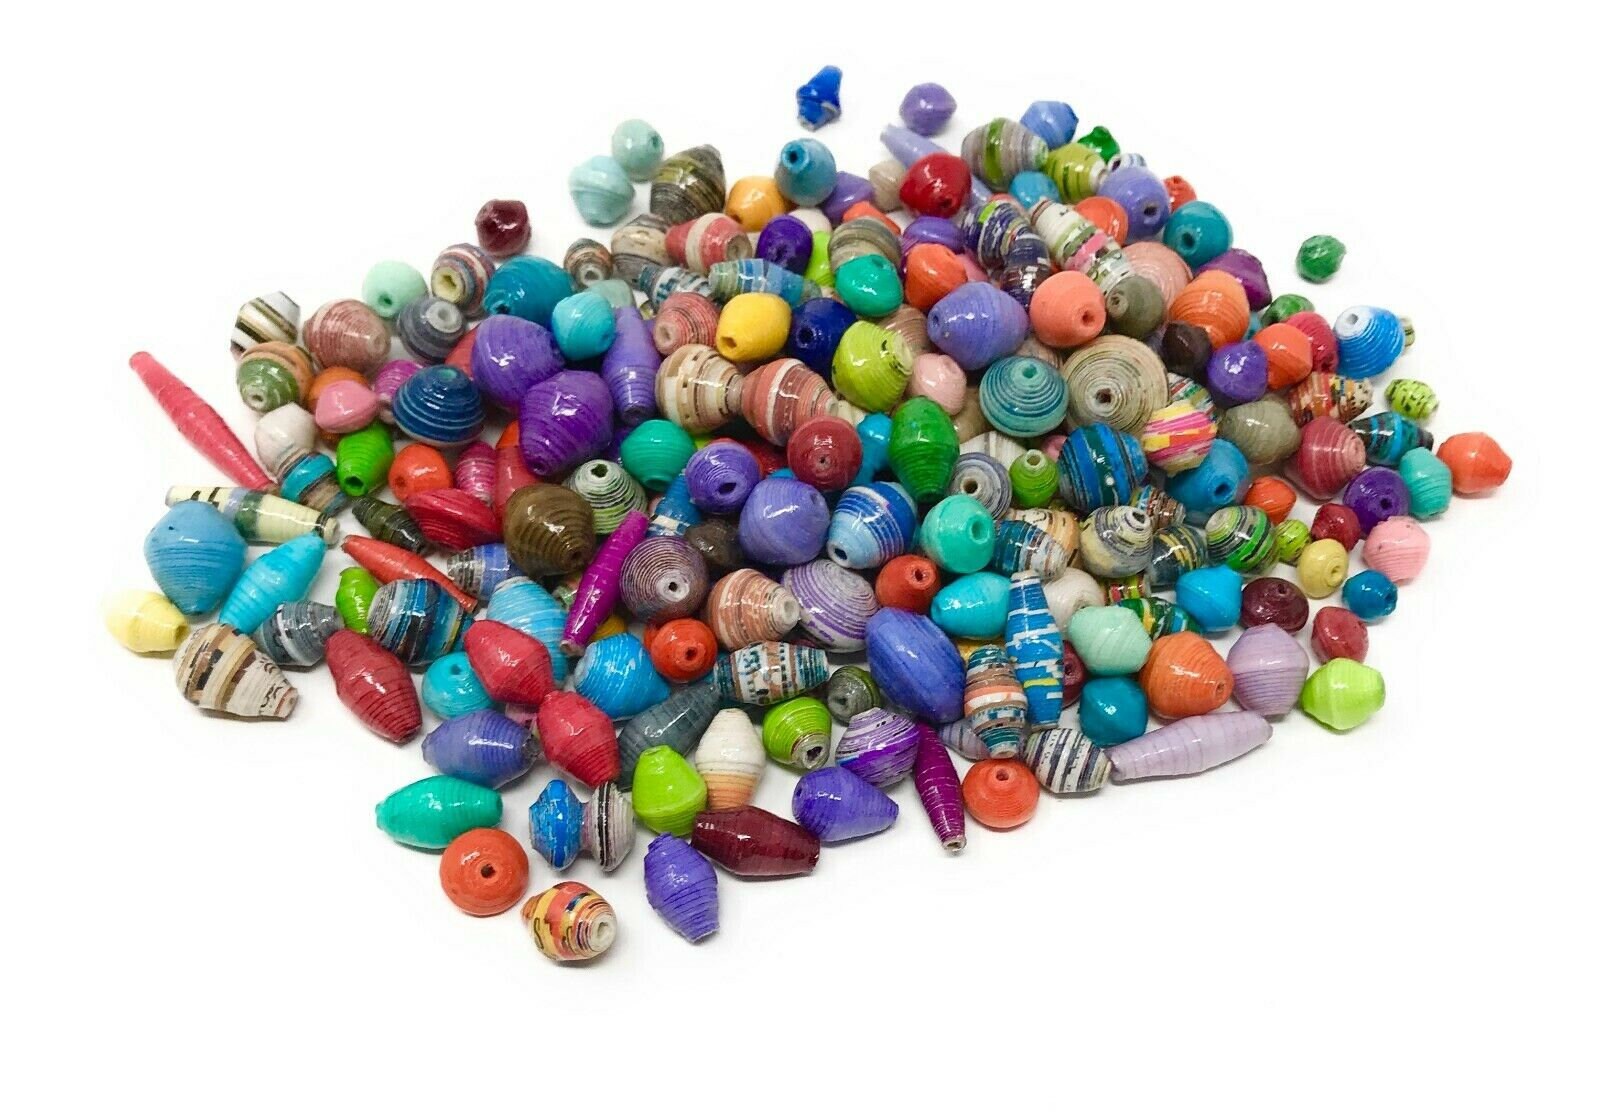 150 count Africa Bead Assortment Outreach Uganda Hand Rolled Paper Beads Bulk Assortment of Multi-Color Beads Recycled Paper Beads 